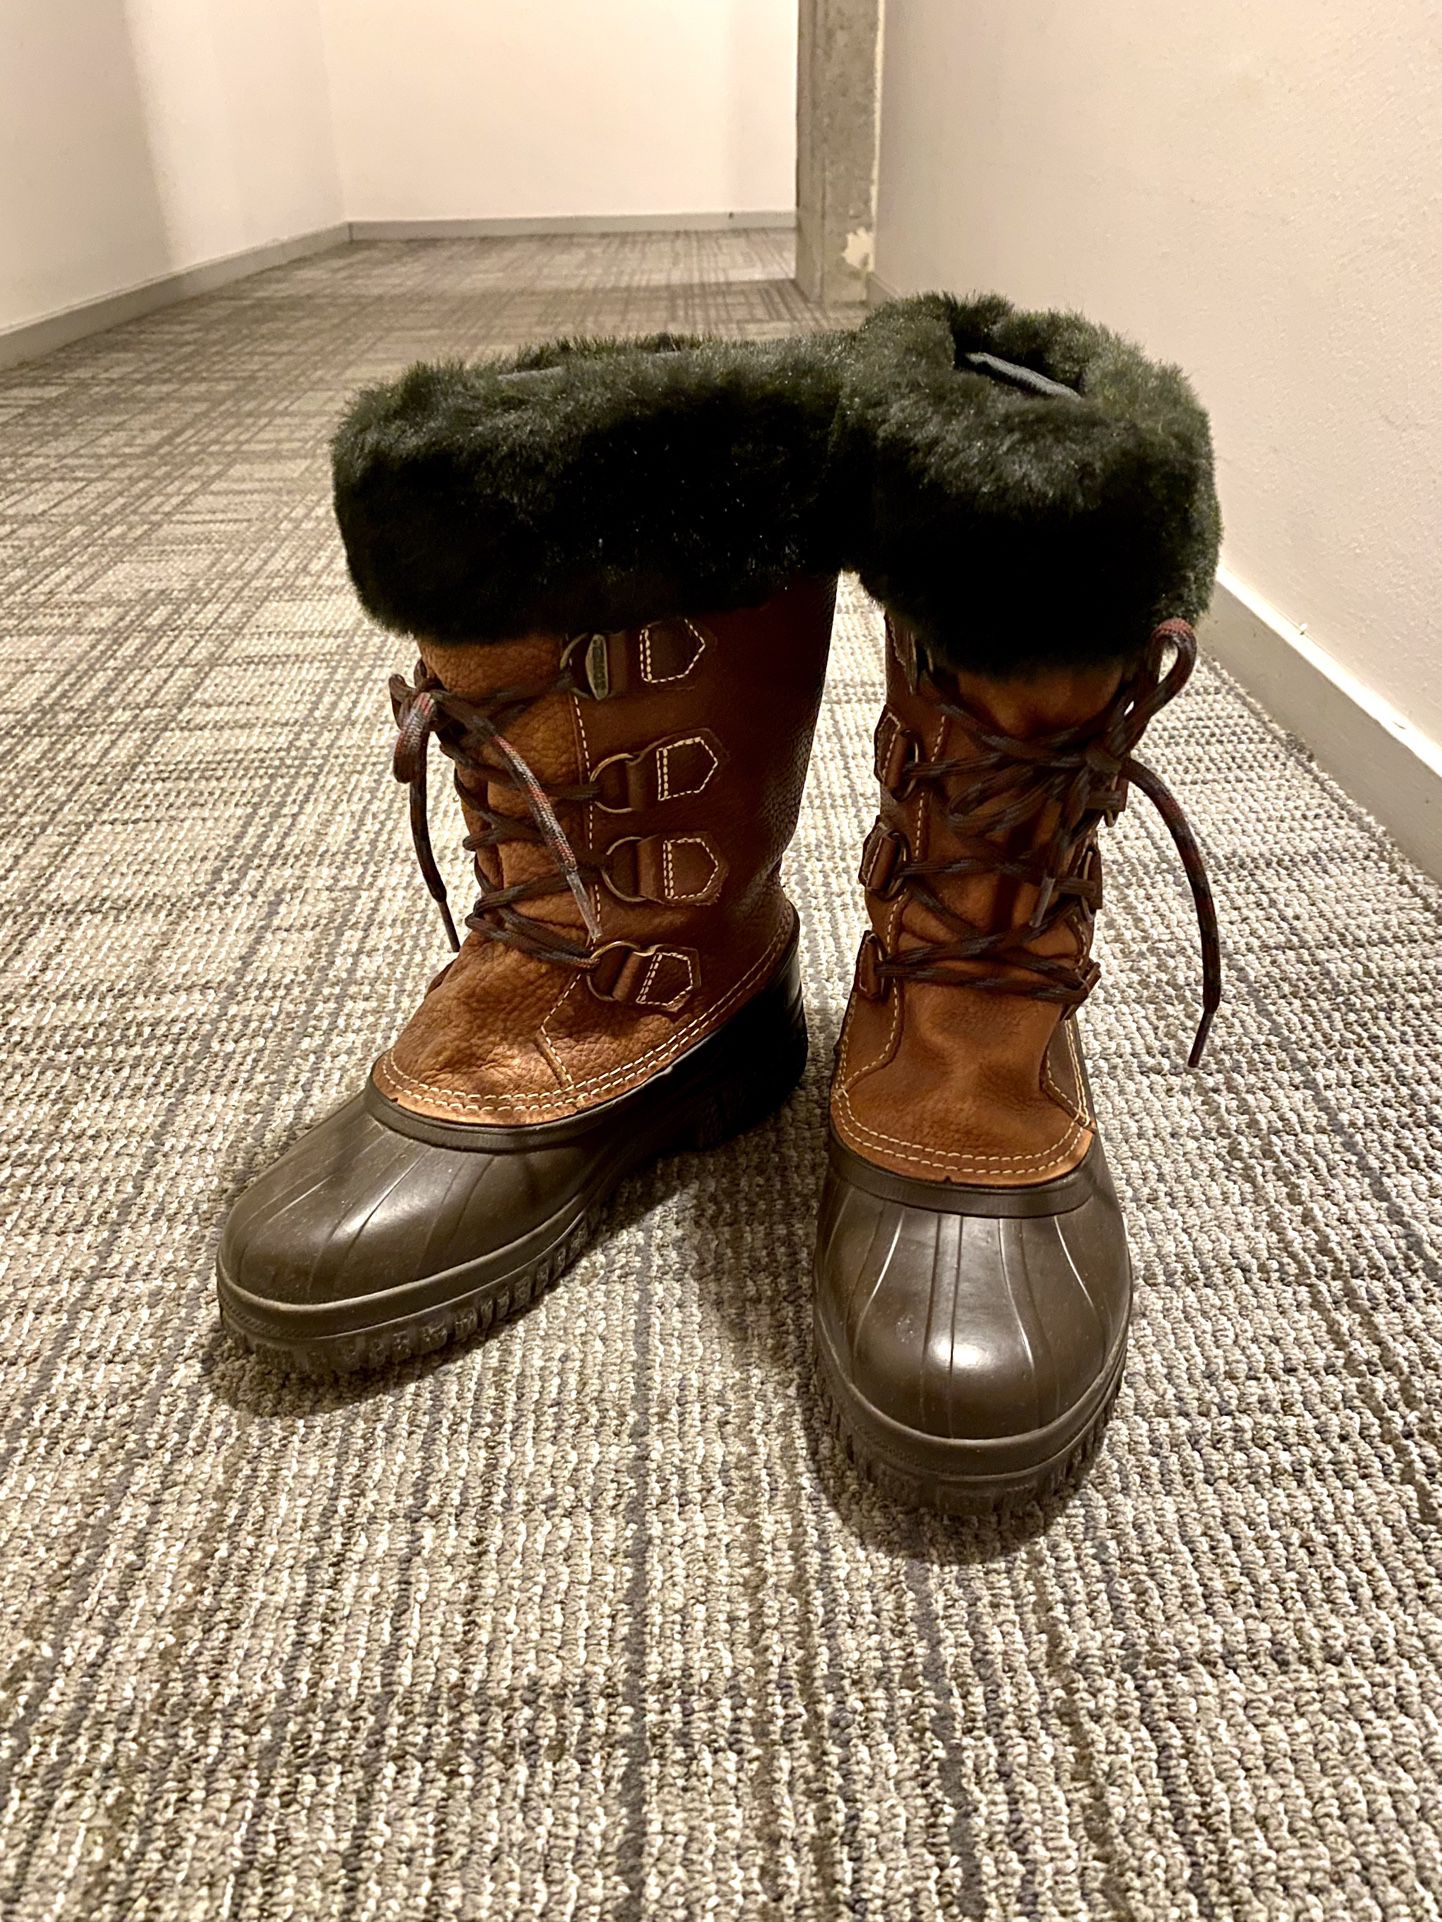 SOREL Boots Size 5 Cambrion x En Fer Style Mid-calf Brown Waterproof Winter Boots